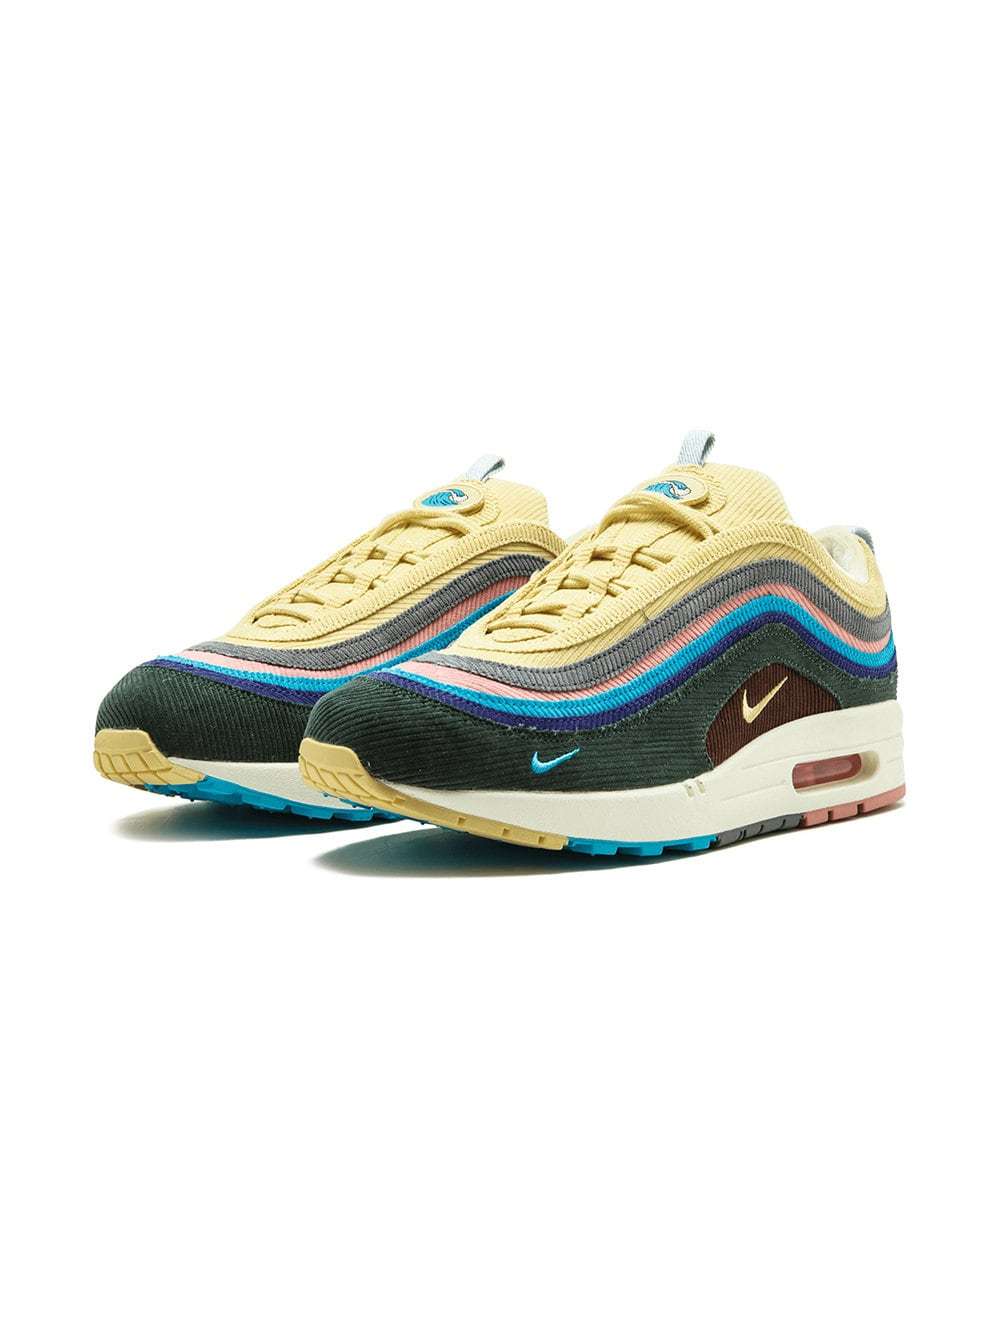 Nike Air Max 197 Vf X Sean Witherspoon Sneakers, $1,365 | farfetch ...